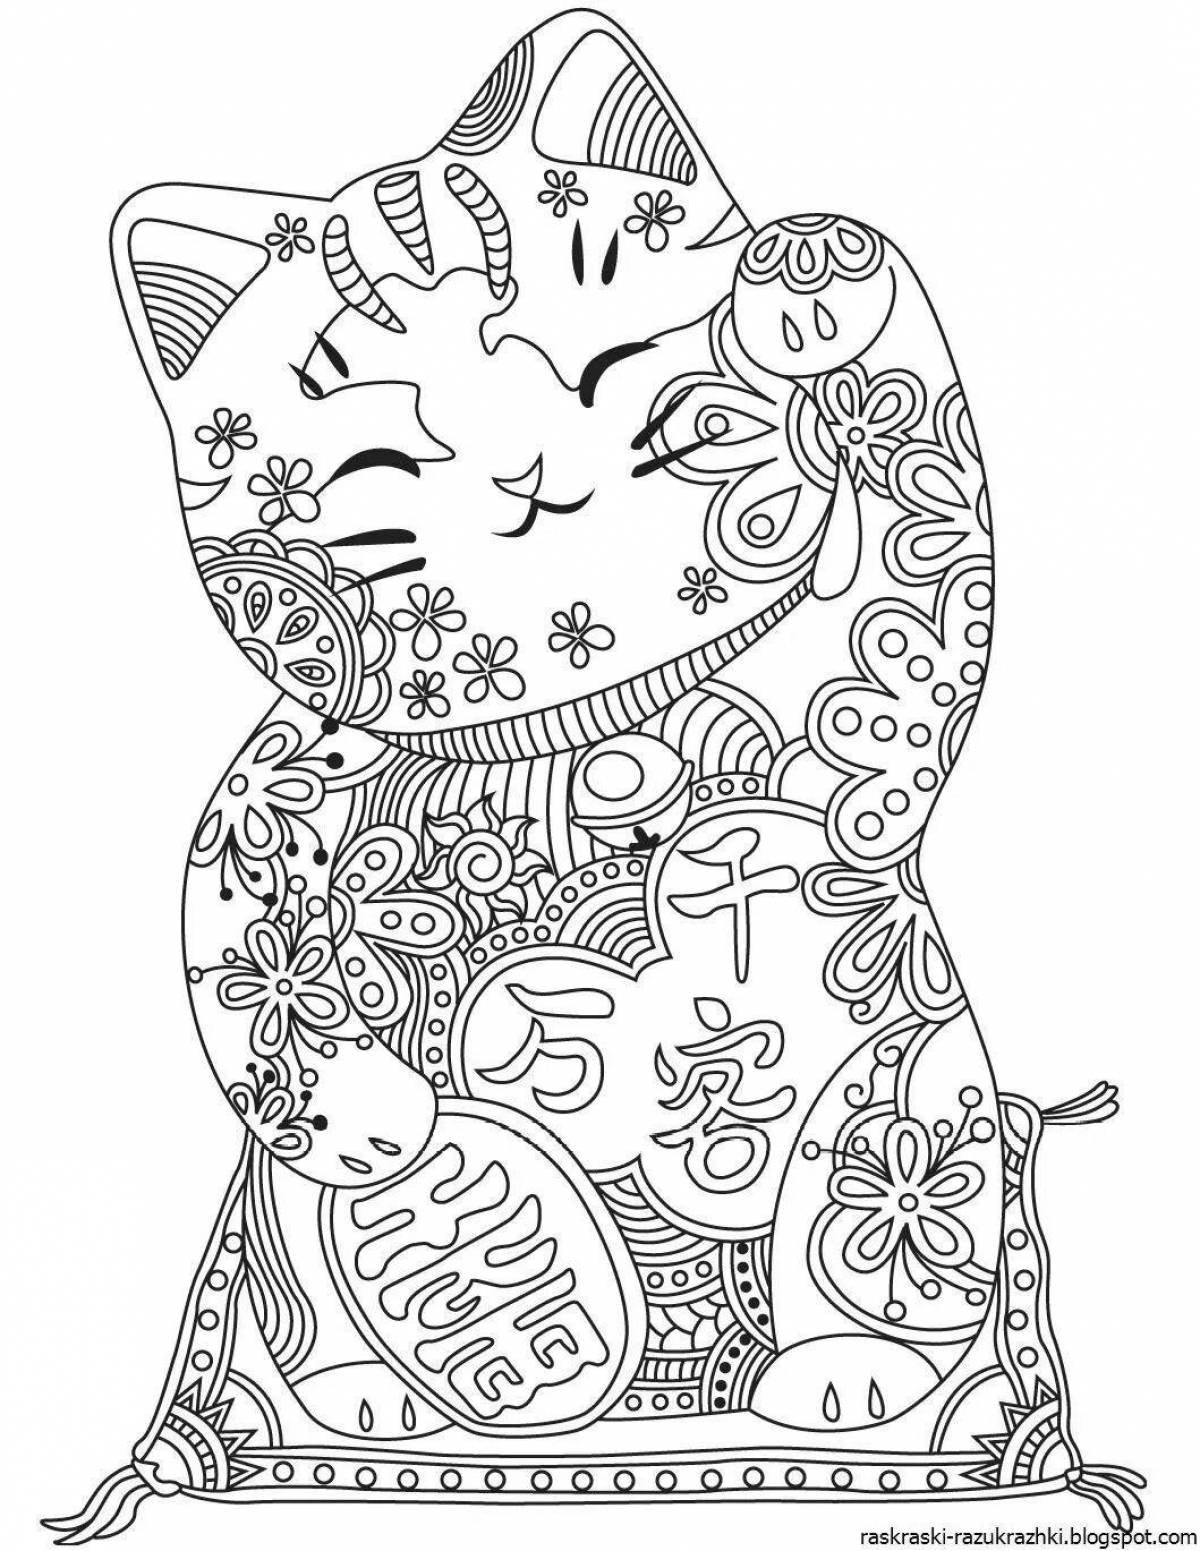 Adorable Chinese cat coloring page